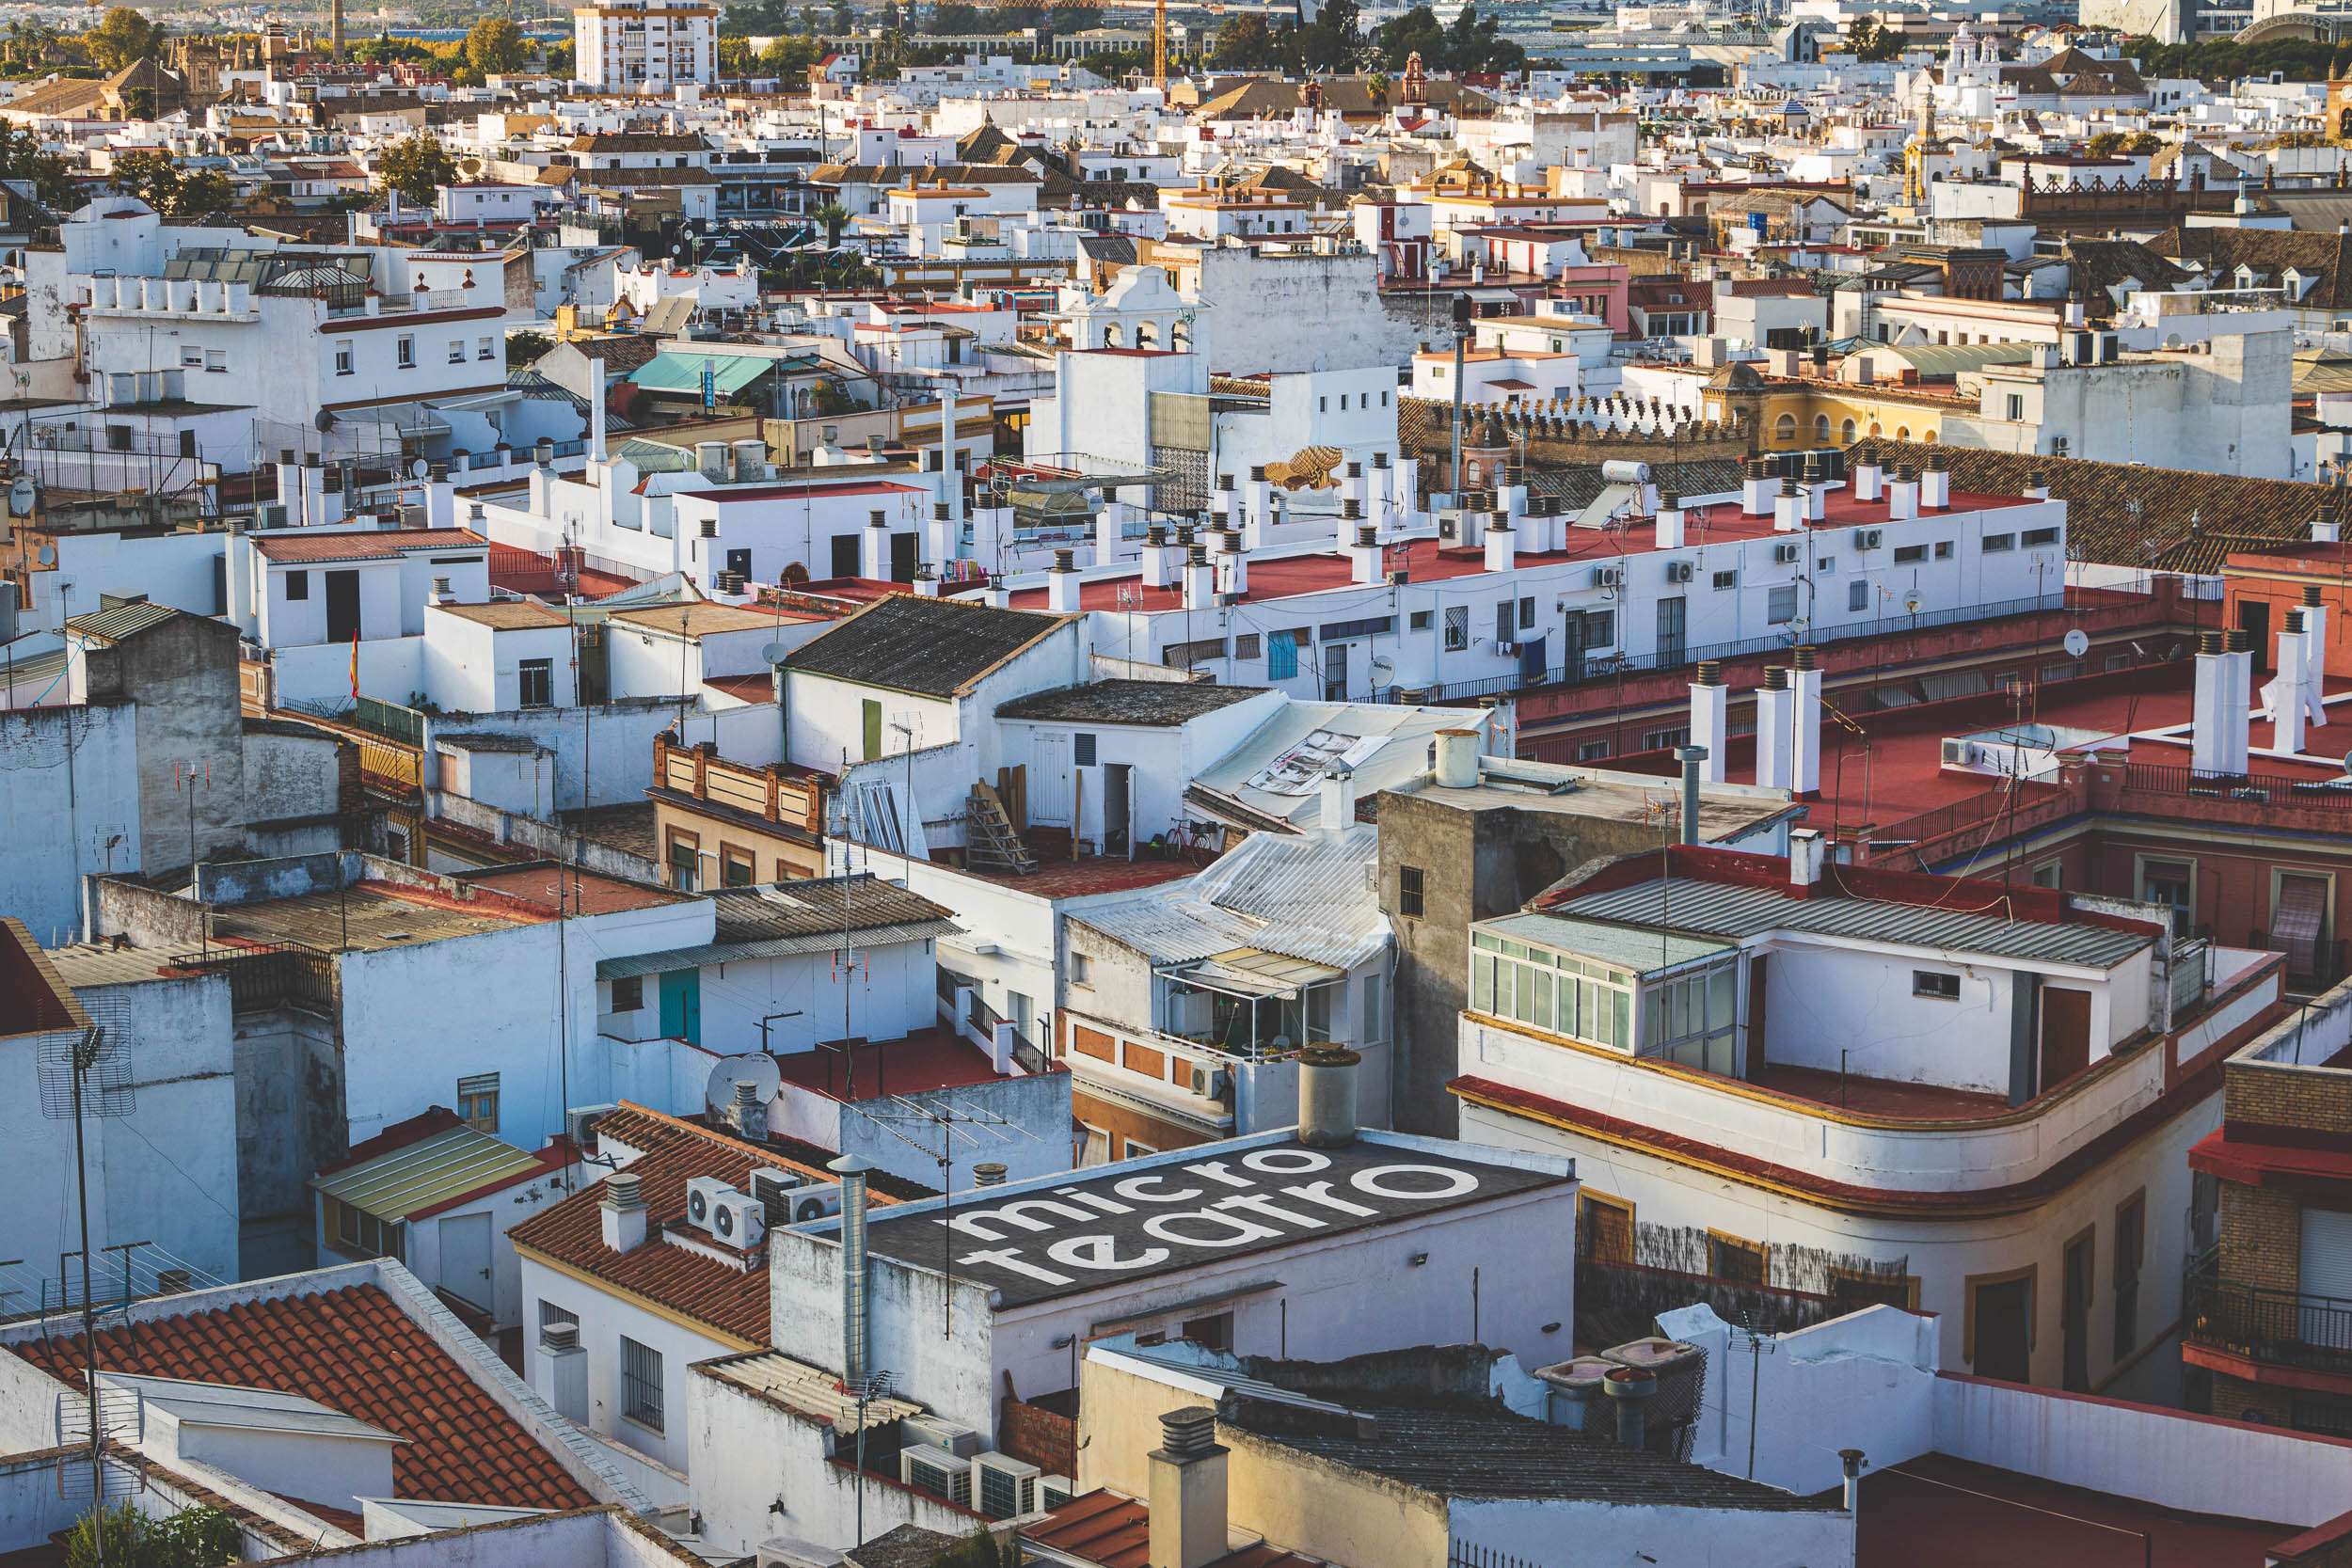 An overhead view of rooftops in Sevilla, Spain